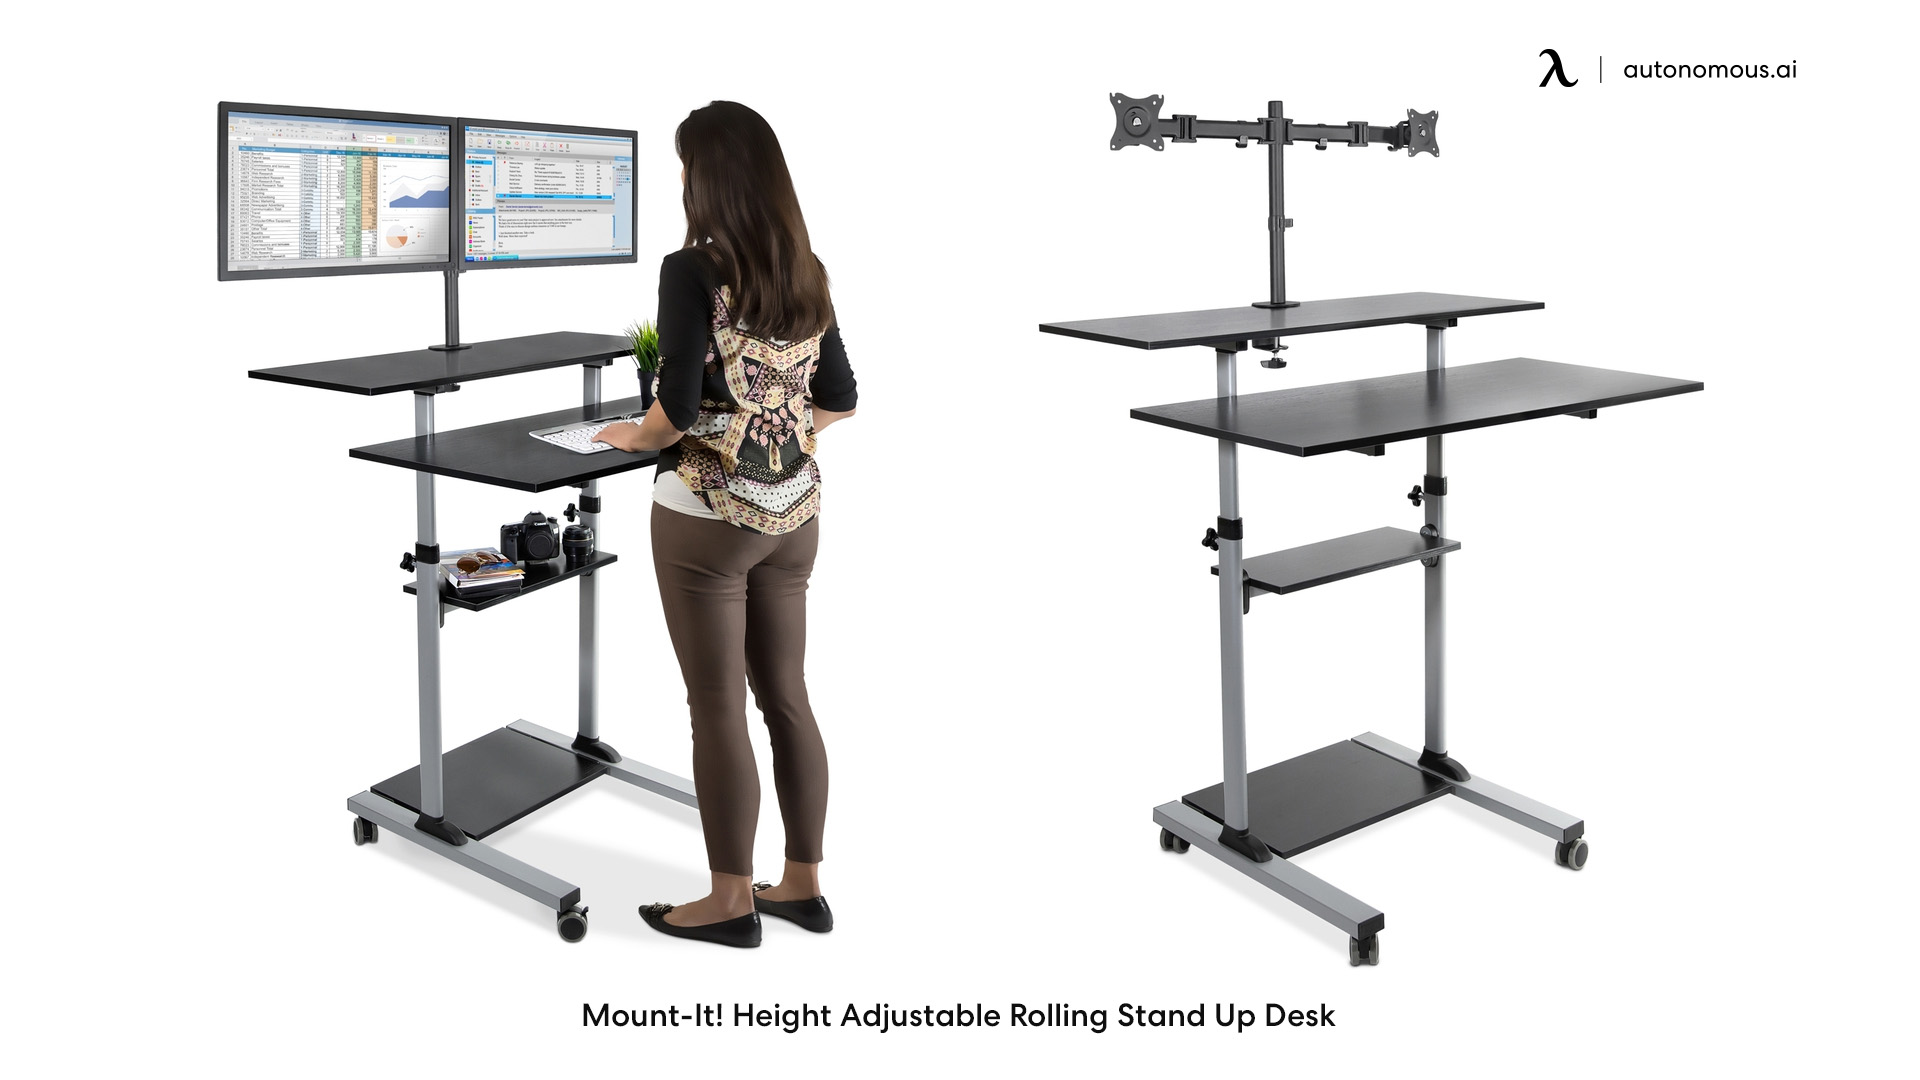 Mount-It! Height Adjustable Rolling Stand Up Desk